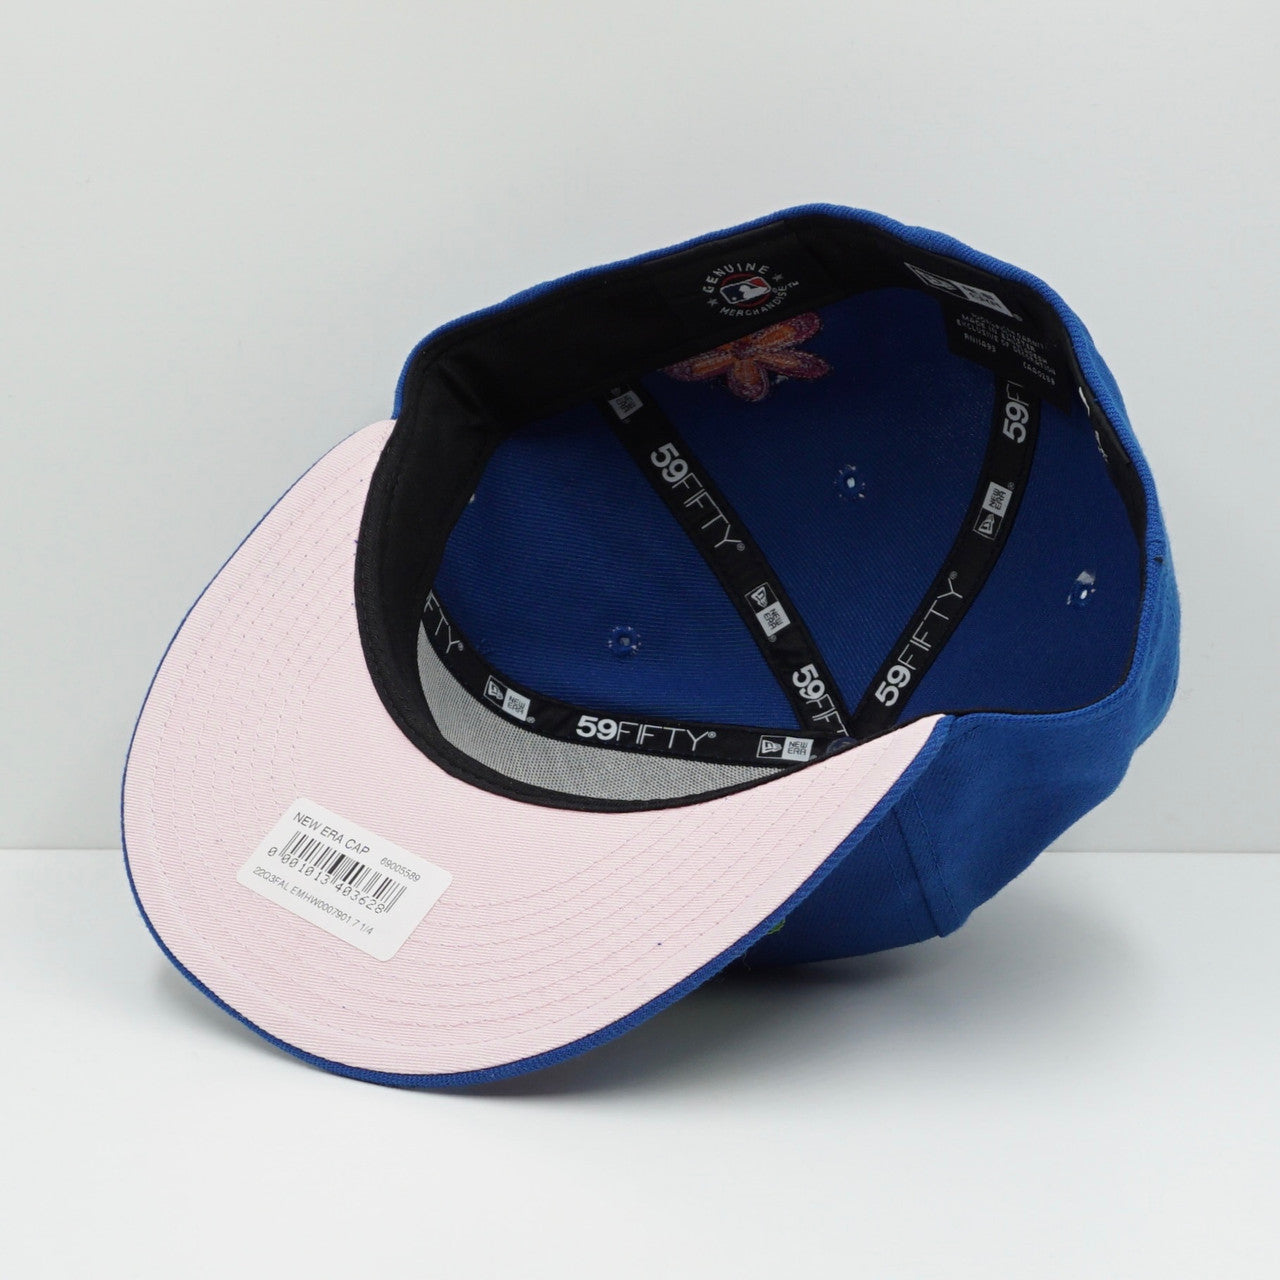 New Era New York Mets Floral Fitted Cap